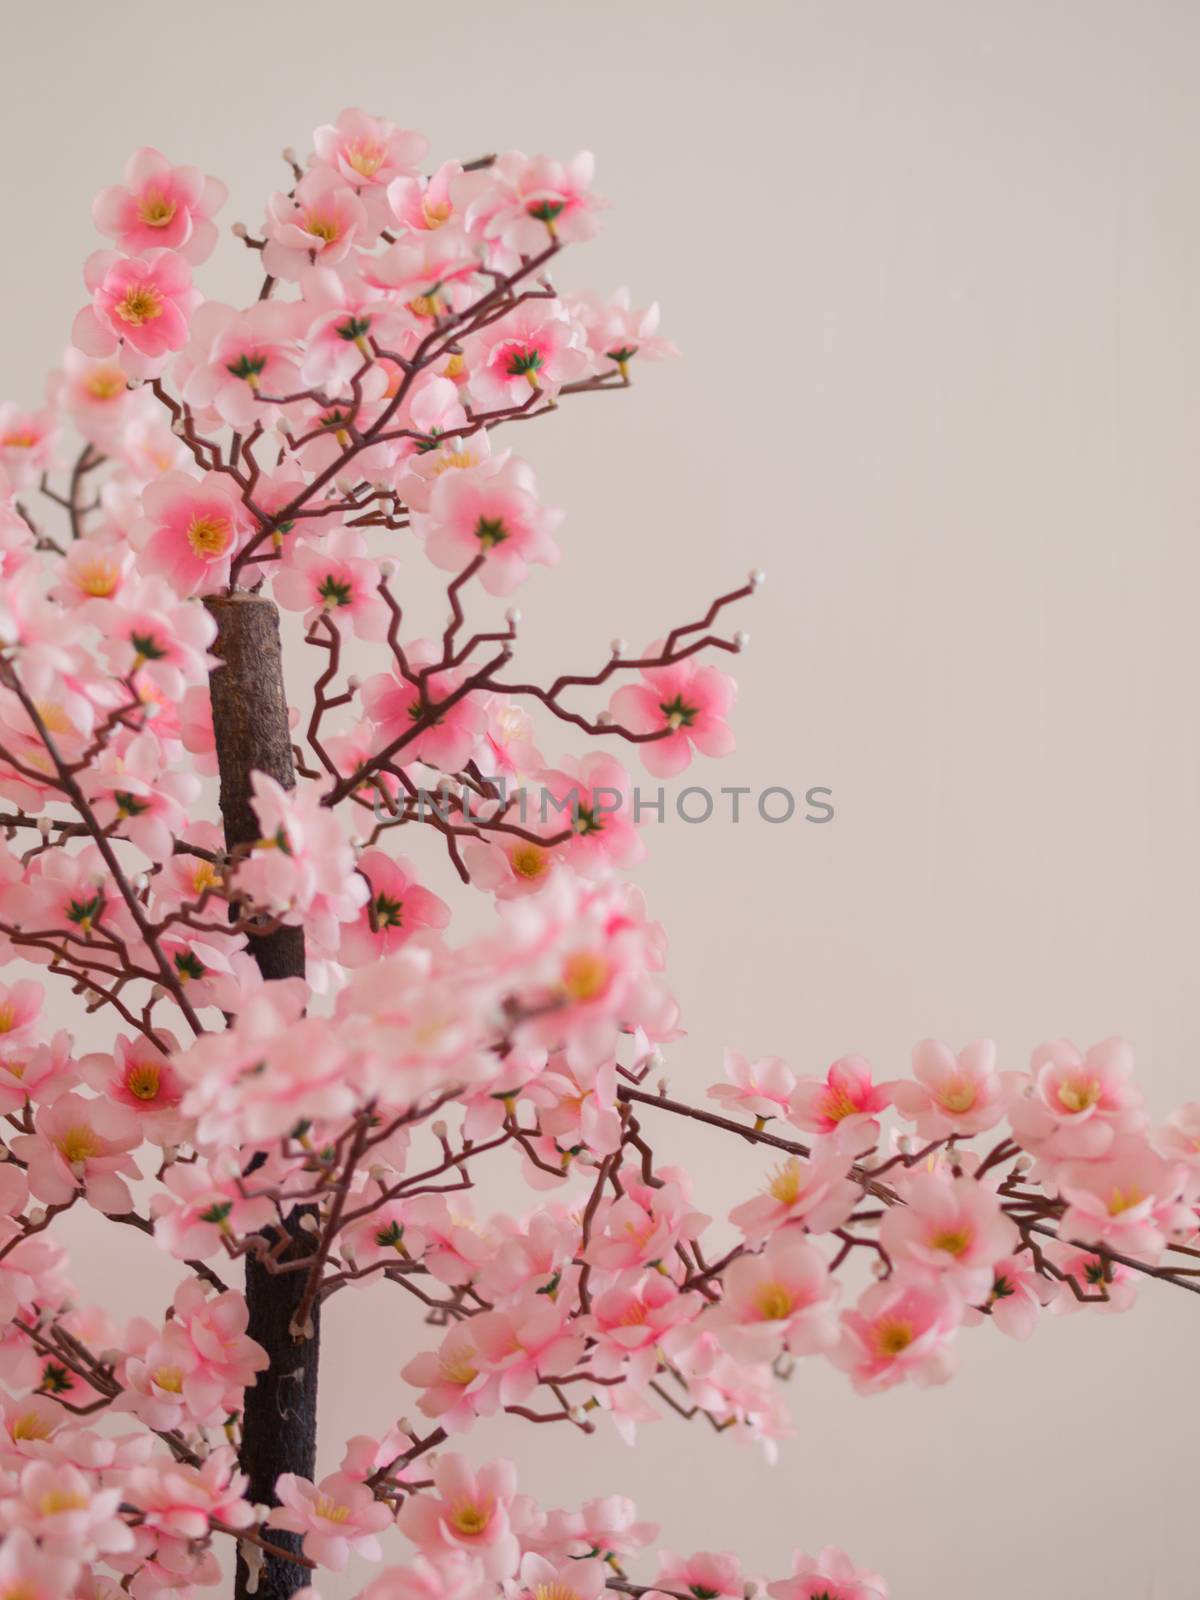 COLOR PHOTO OF CHERRY BLOSSOM IN FULL BLOOM